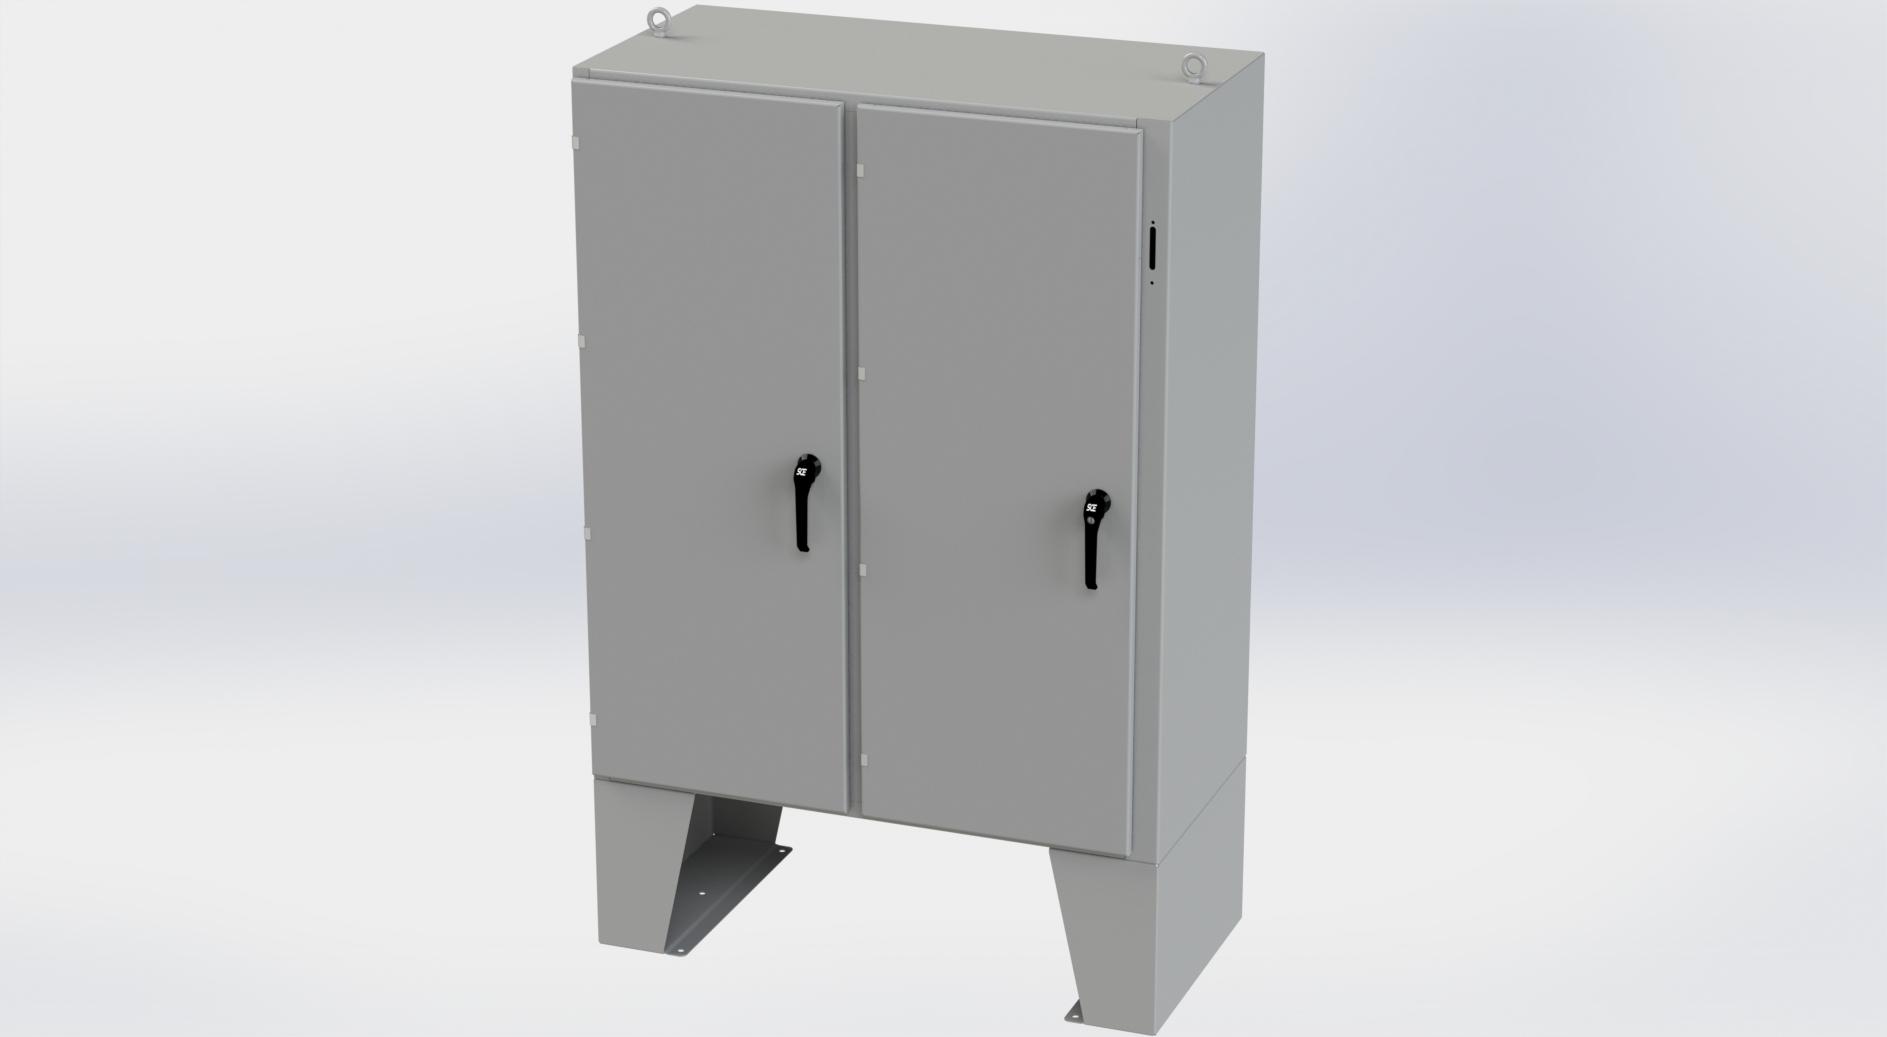 Saginaw Control SCE-60XEL4924LP 2DR XEL Enclosure, Height:60.00", Width:49.00", Depth:24.00", ANSI-61 gray powder coating inside and out. Optional sub-panels are powder coated white.